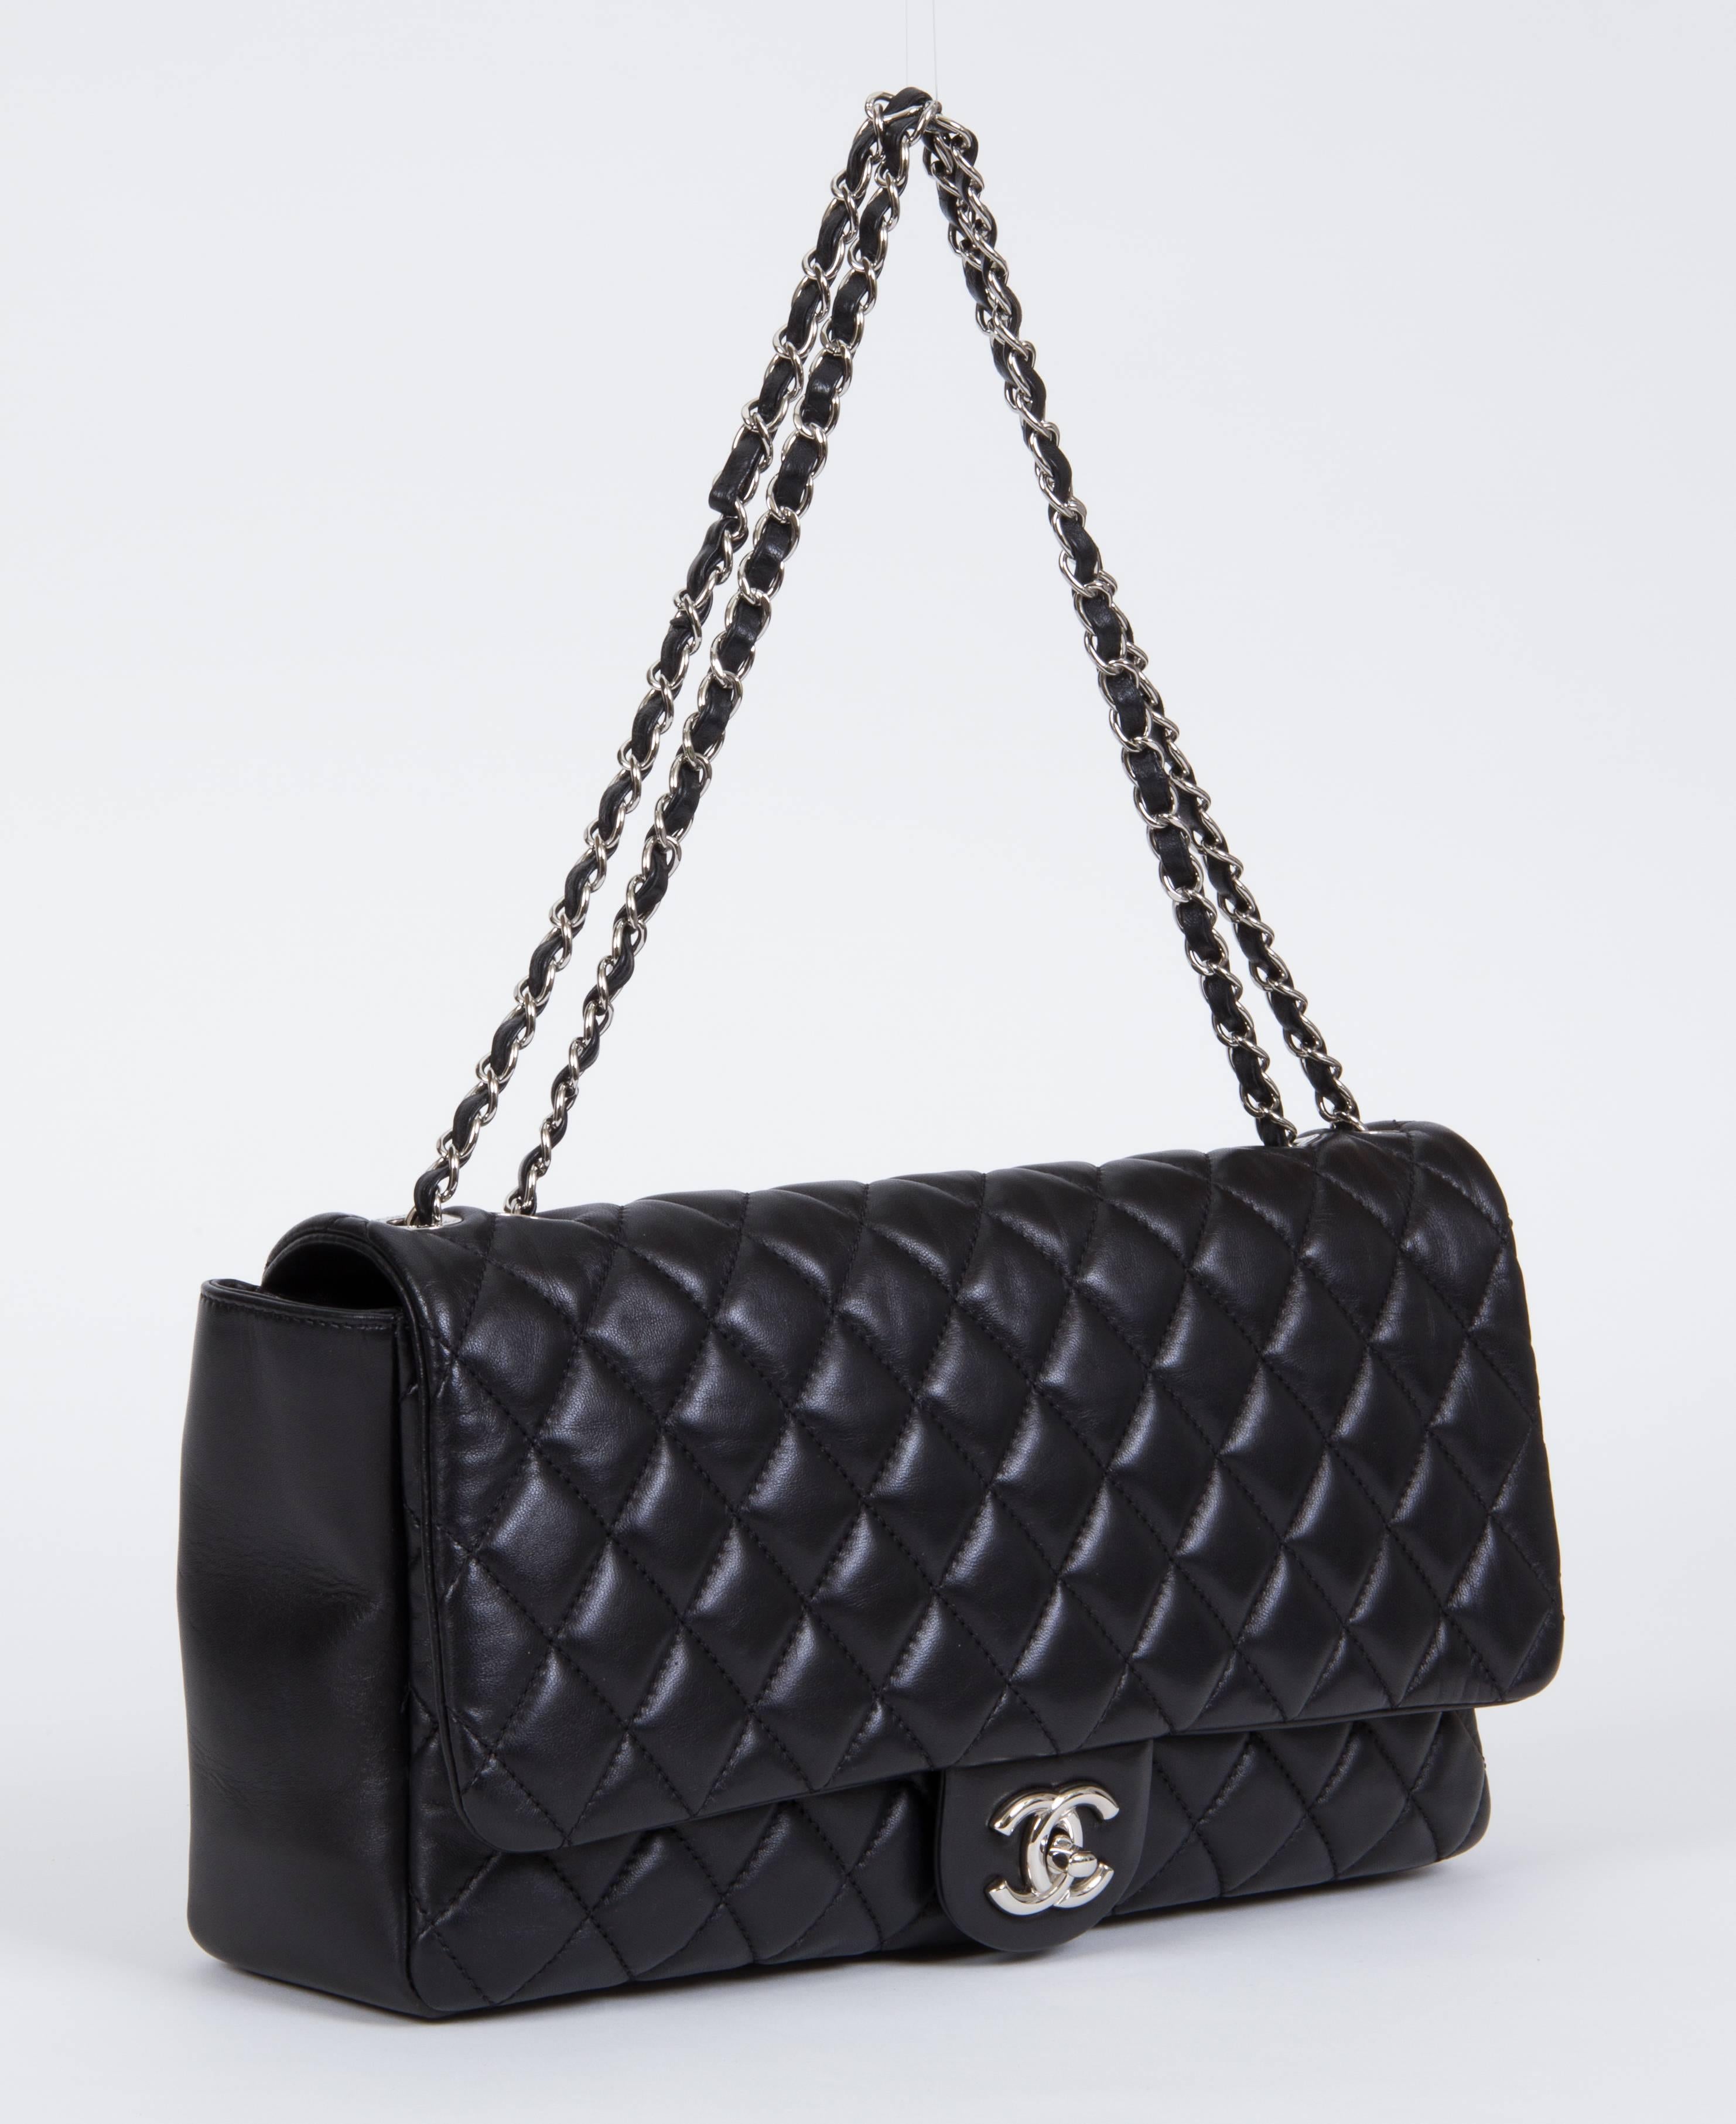 Chanel limited edition black lambskin quilted jumbo flap with silver tone hardware. Special edition with retractable rain jacket. Measurements: 13